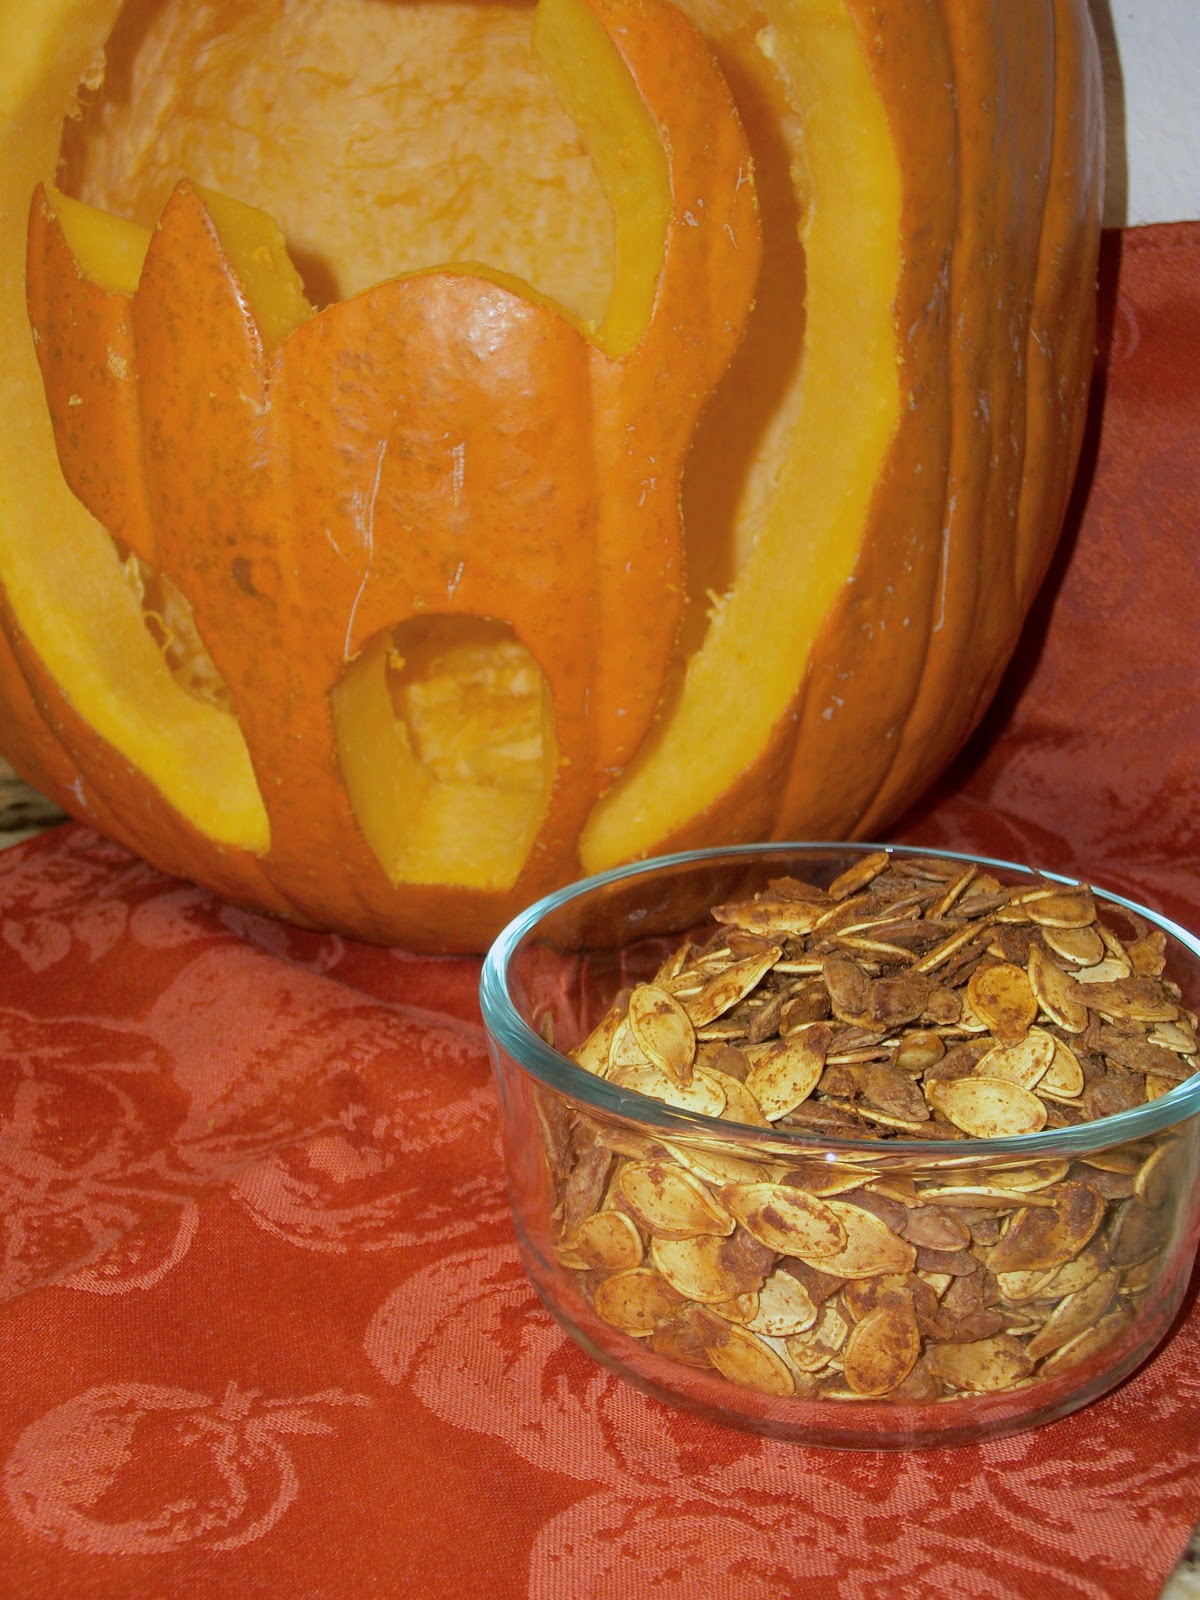 You'll love this spicy take on traditional roasted pumpkin seeds in my Roasted Spiced Pumpkin Seeds recipe.  It's a family favorite!